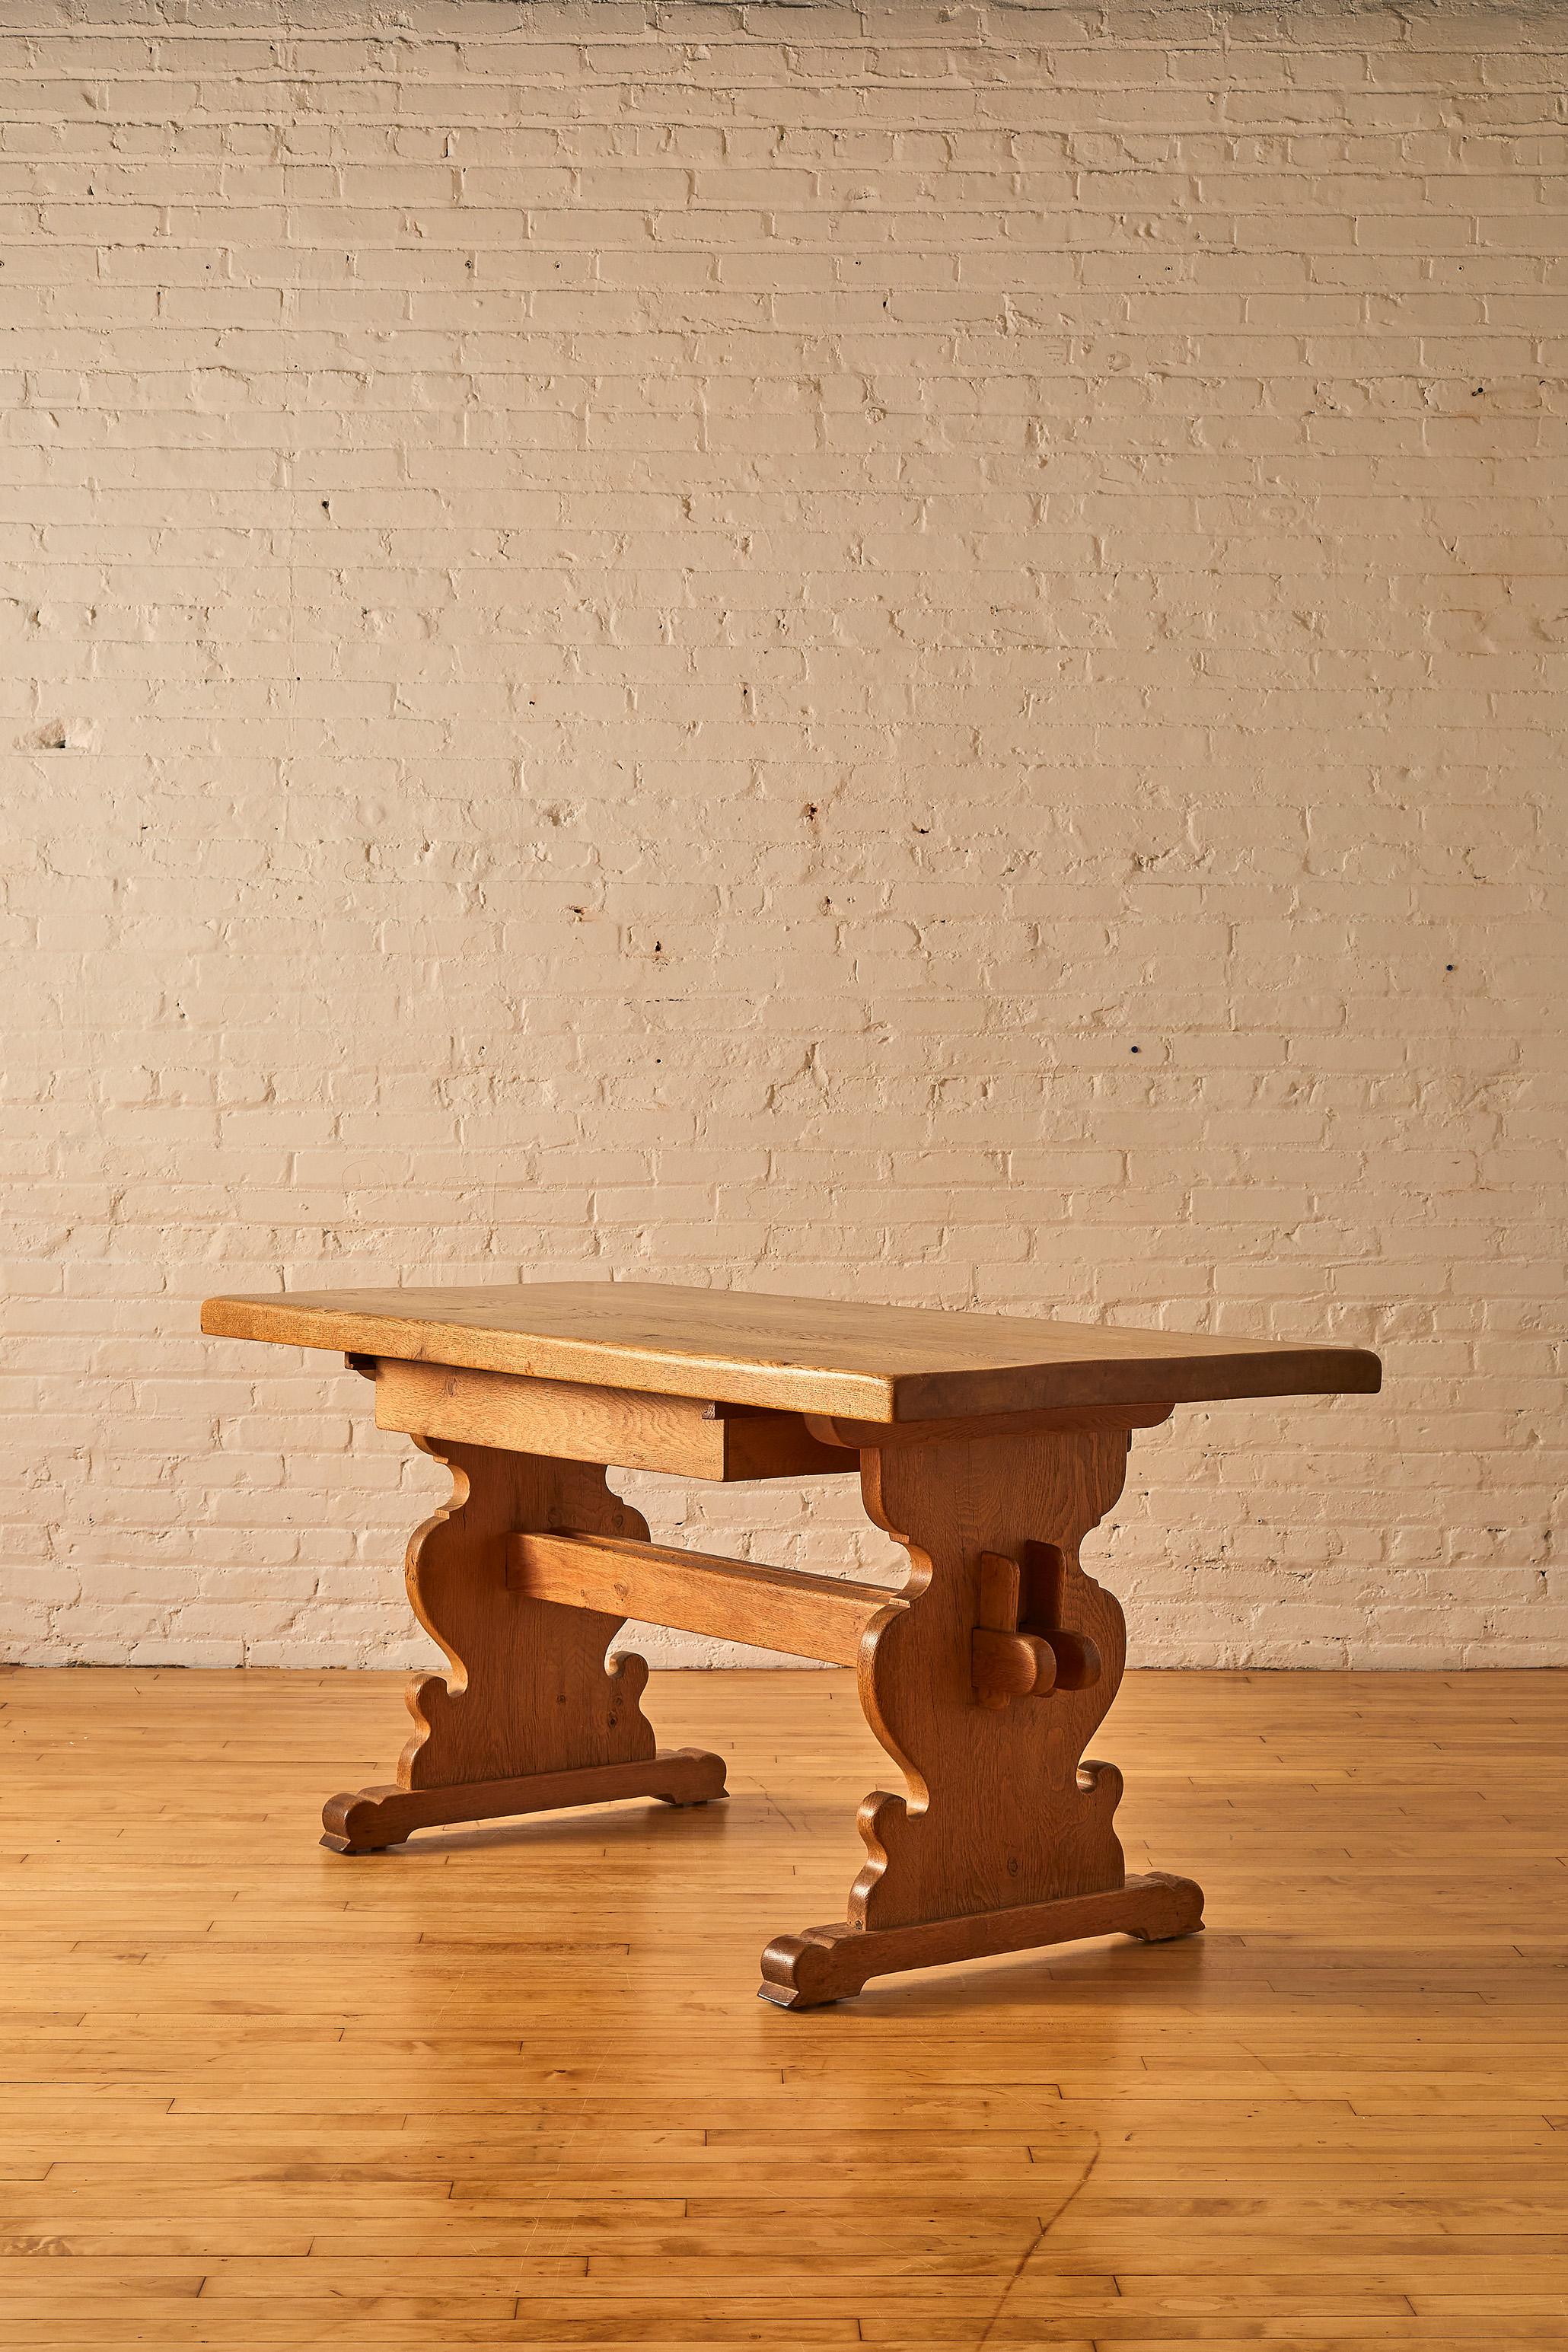 Heavy oak dining table with Trestle Base featuring a drawer with dual side access. 

